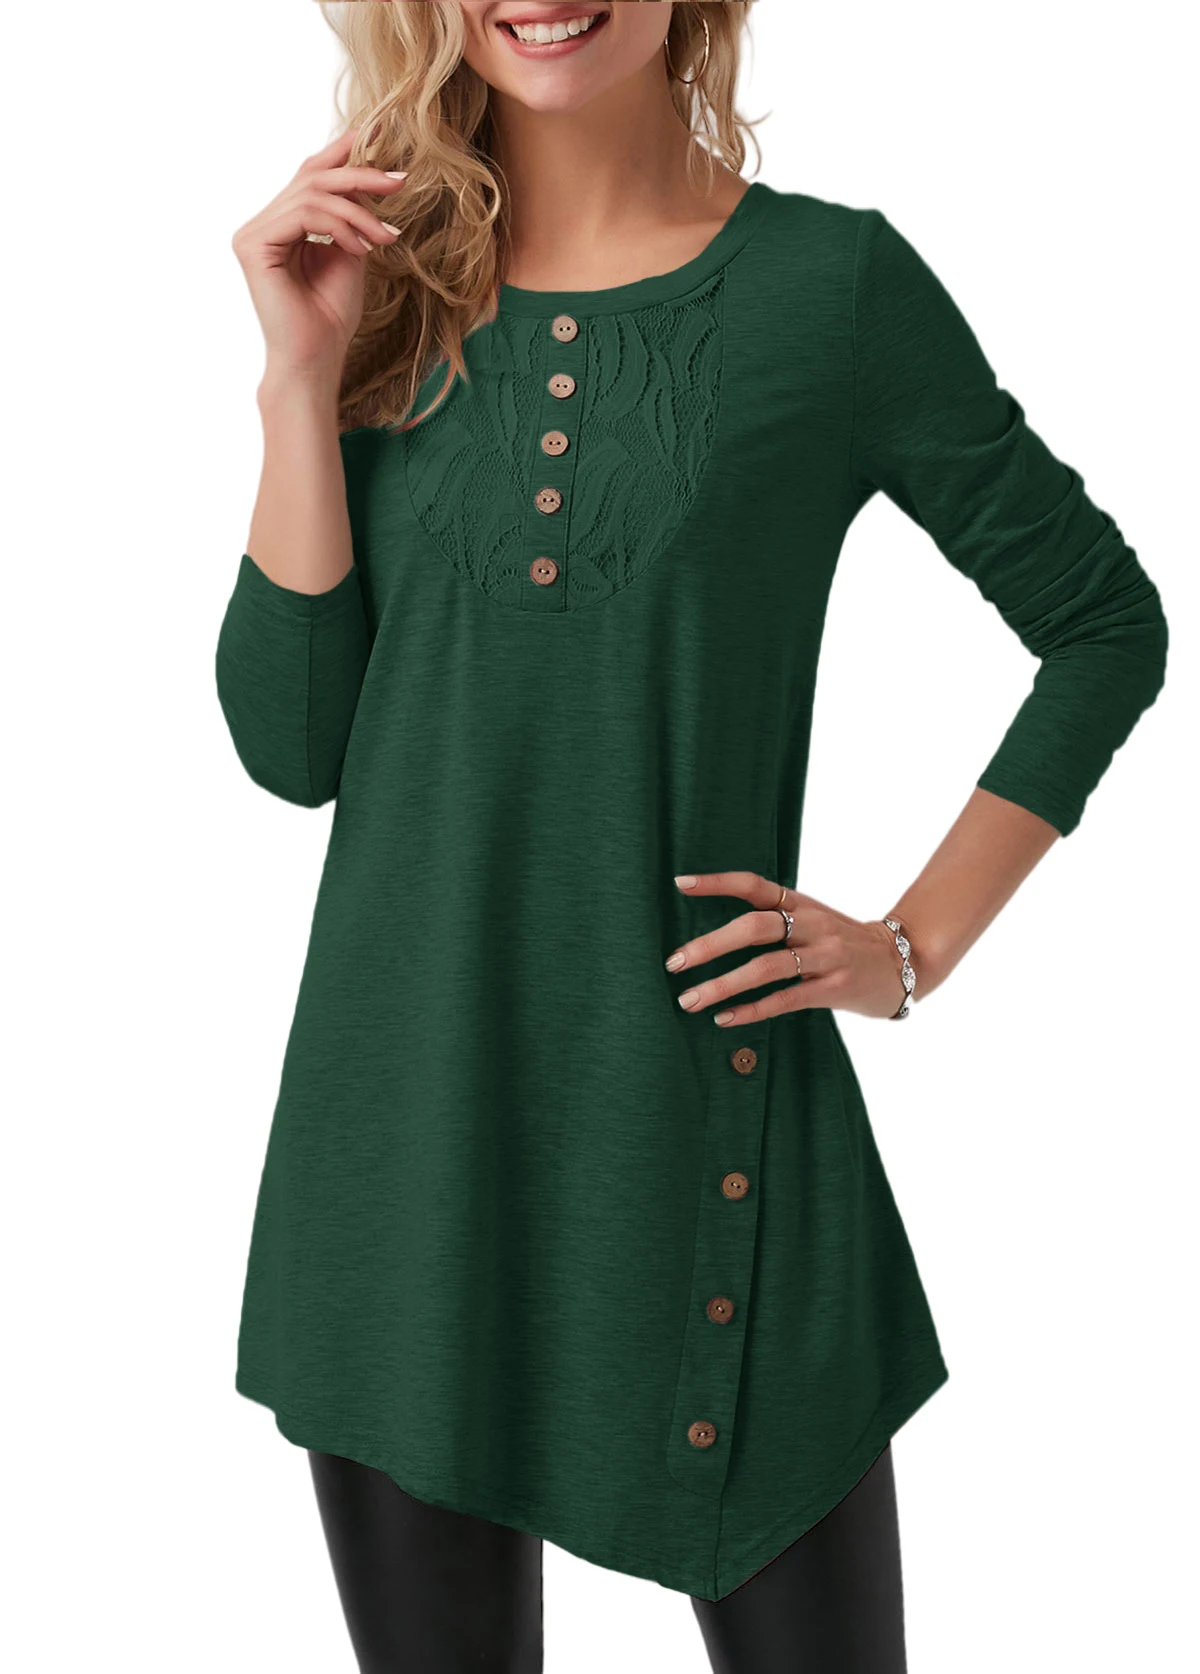 

Crew-Neck Decorative Button Long Sleeve Asymmetric Hem T Shirt Loose Fitting Tunic Solid Color Tops Blouse